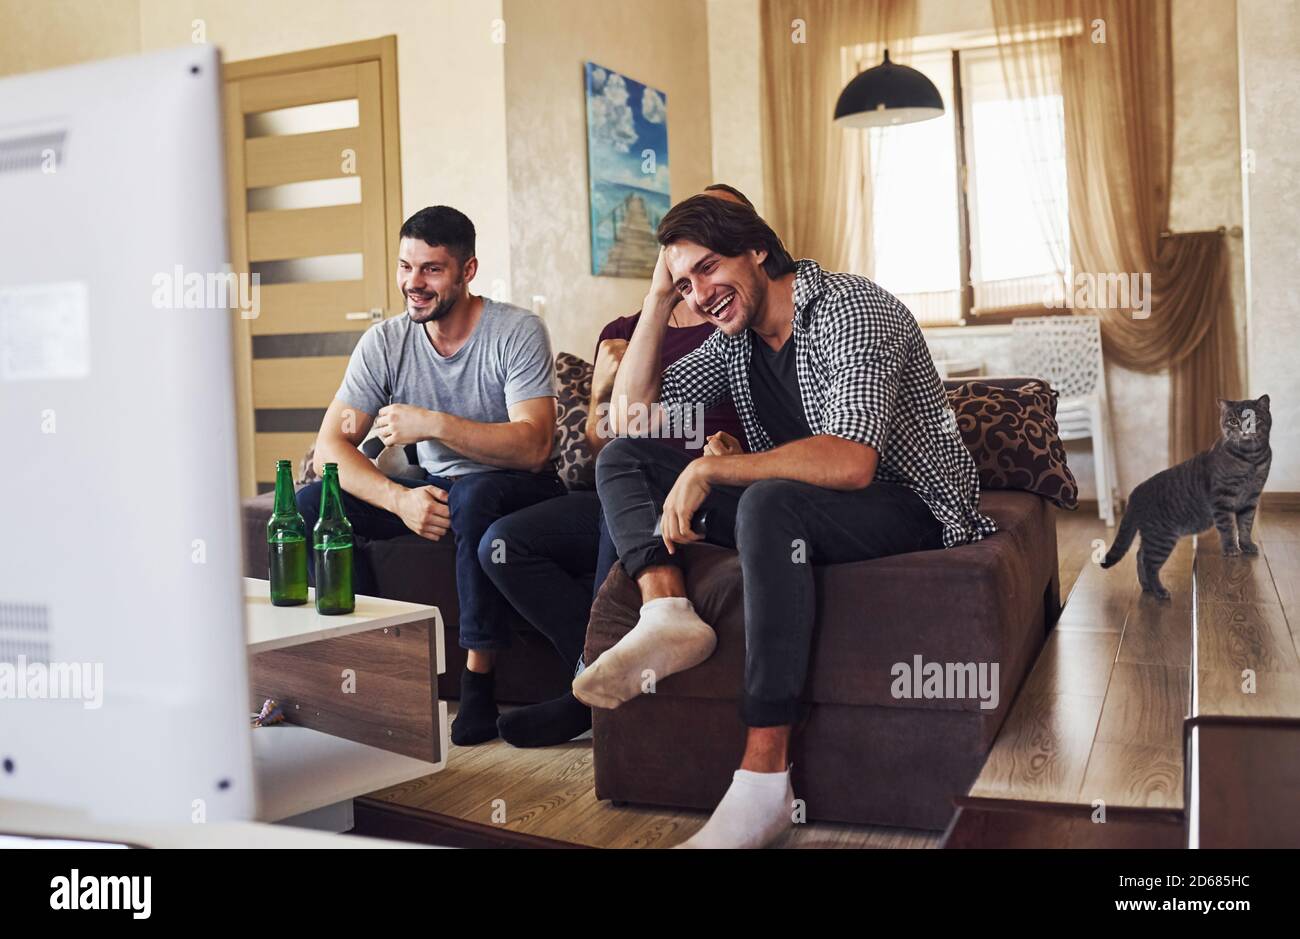 Cat on the stands and people laughing. Excited three friends watching soccer on TV at home together Stock Photo